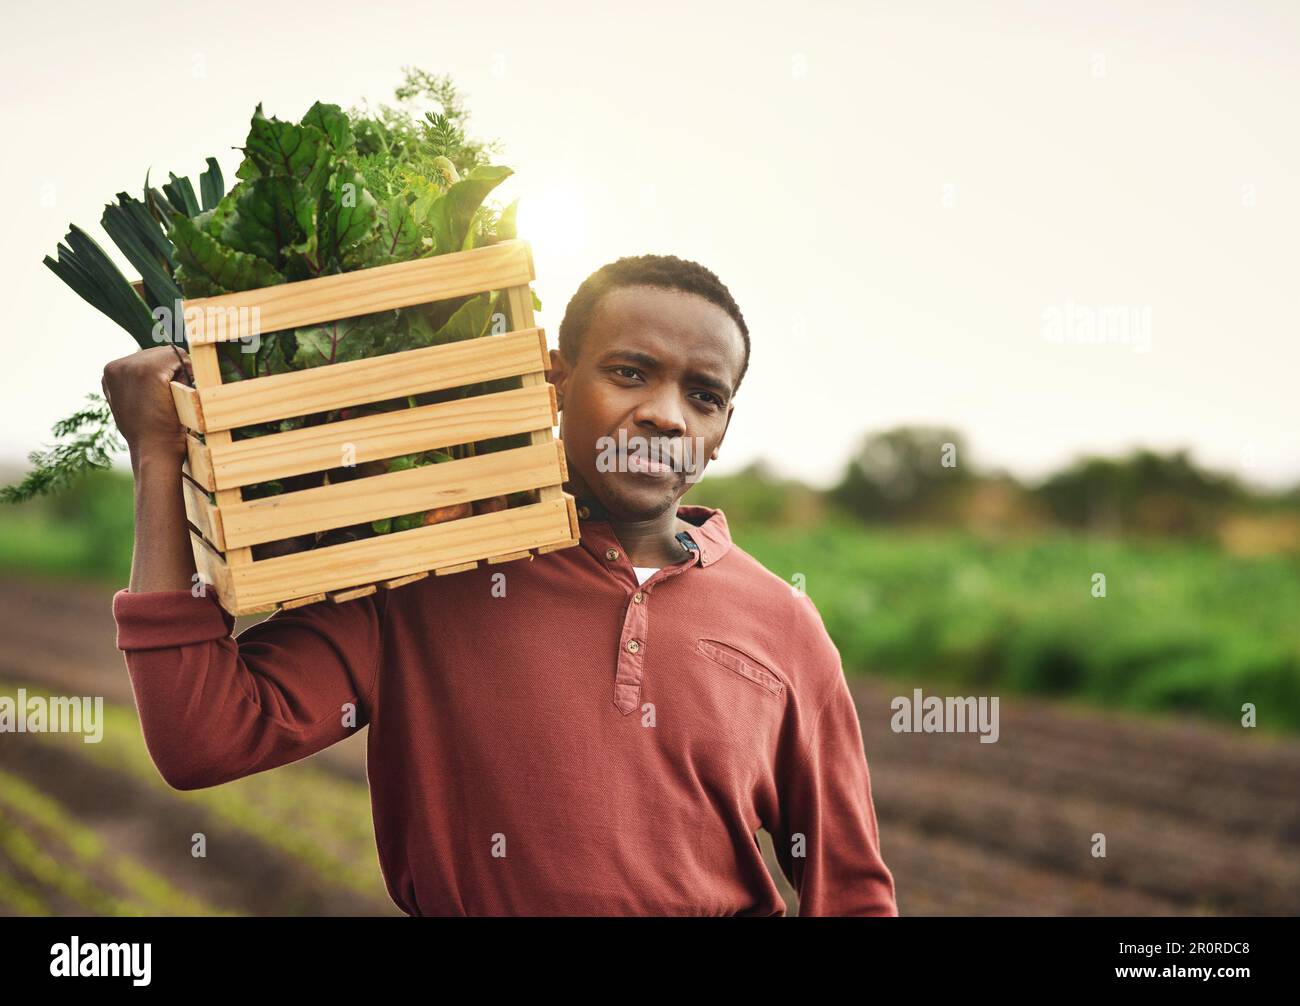 Mother natures harvest. a handsome young male farmer carrying a crate of fresh produce. Stock Photo